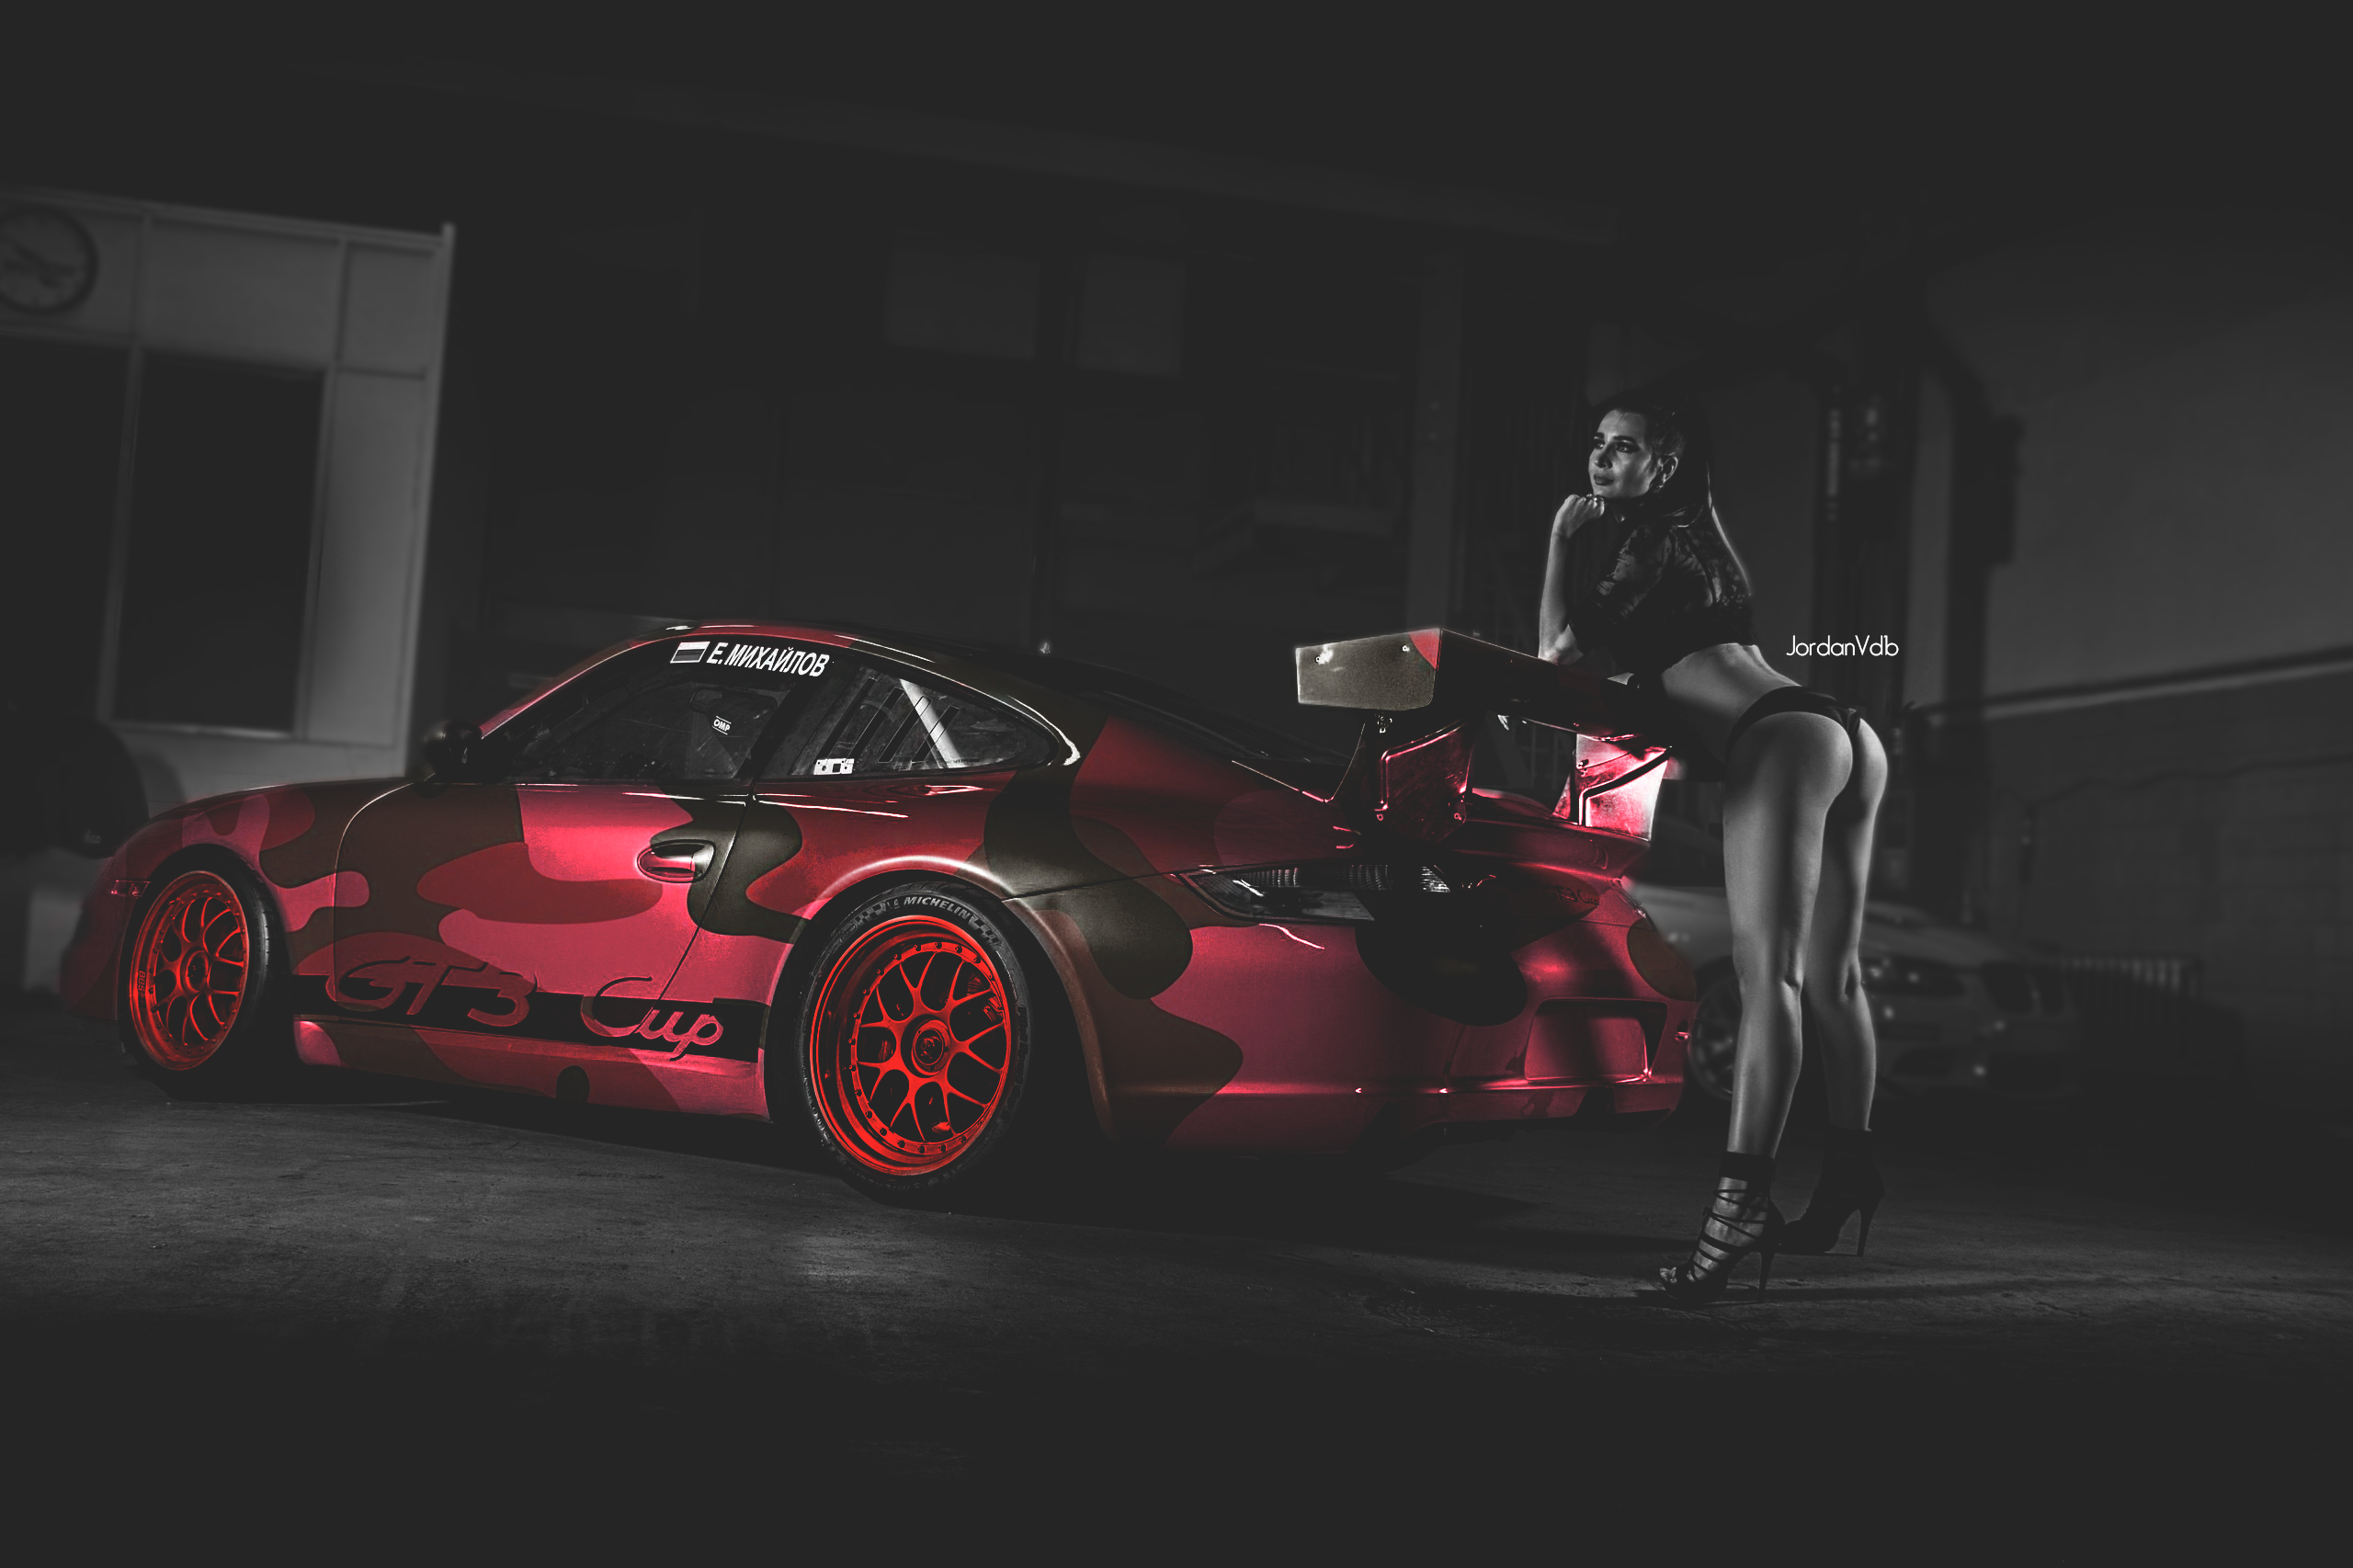 People 2560x1706 photo manipulation photoshopped car women women with cars selective coloring legs back ass high heels panties lingerie resting head bent over BMW colored wheels Porsche 911 GT3 R BMW E92 Porsche 911 BMW 3 Series standing